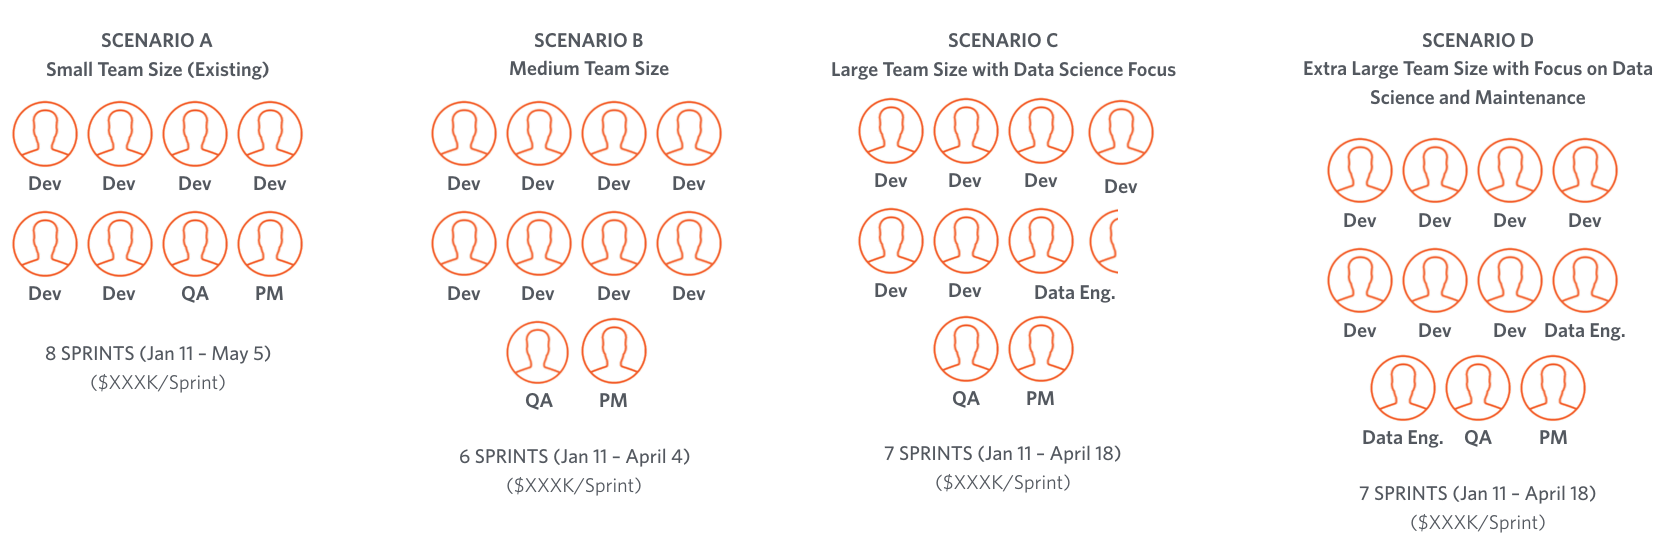 Four scenarios that display team sizes ranging from 6 to 10 people, and the costs associated with each